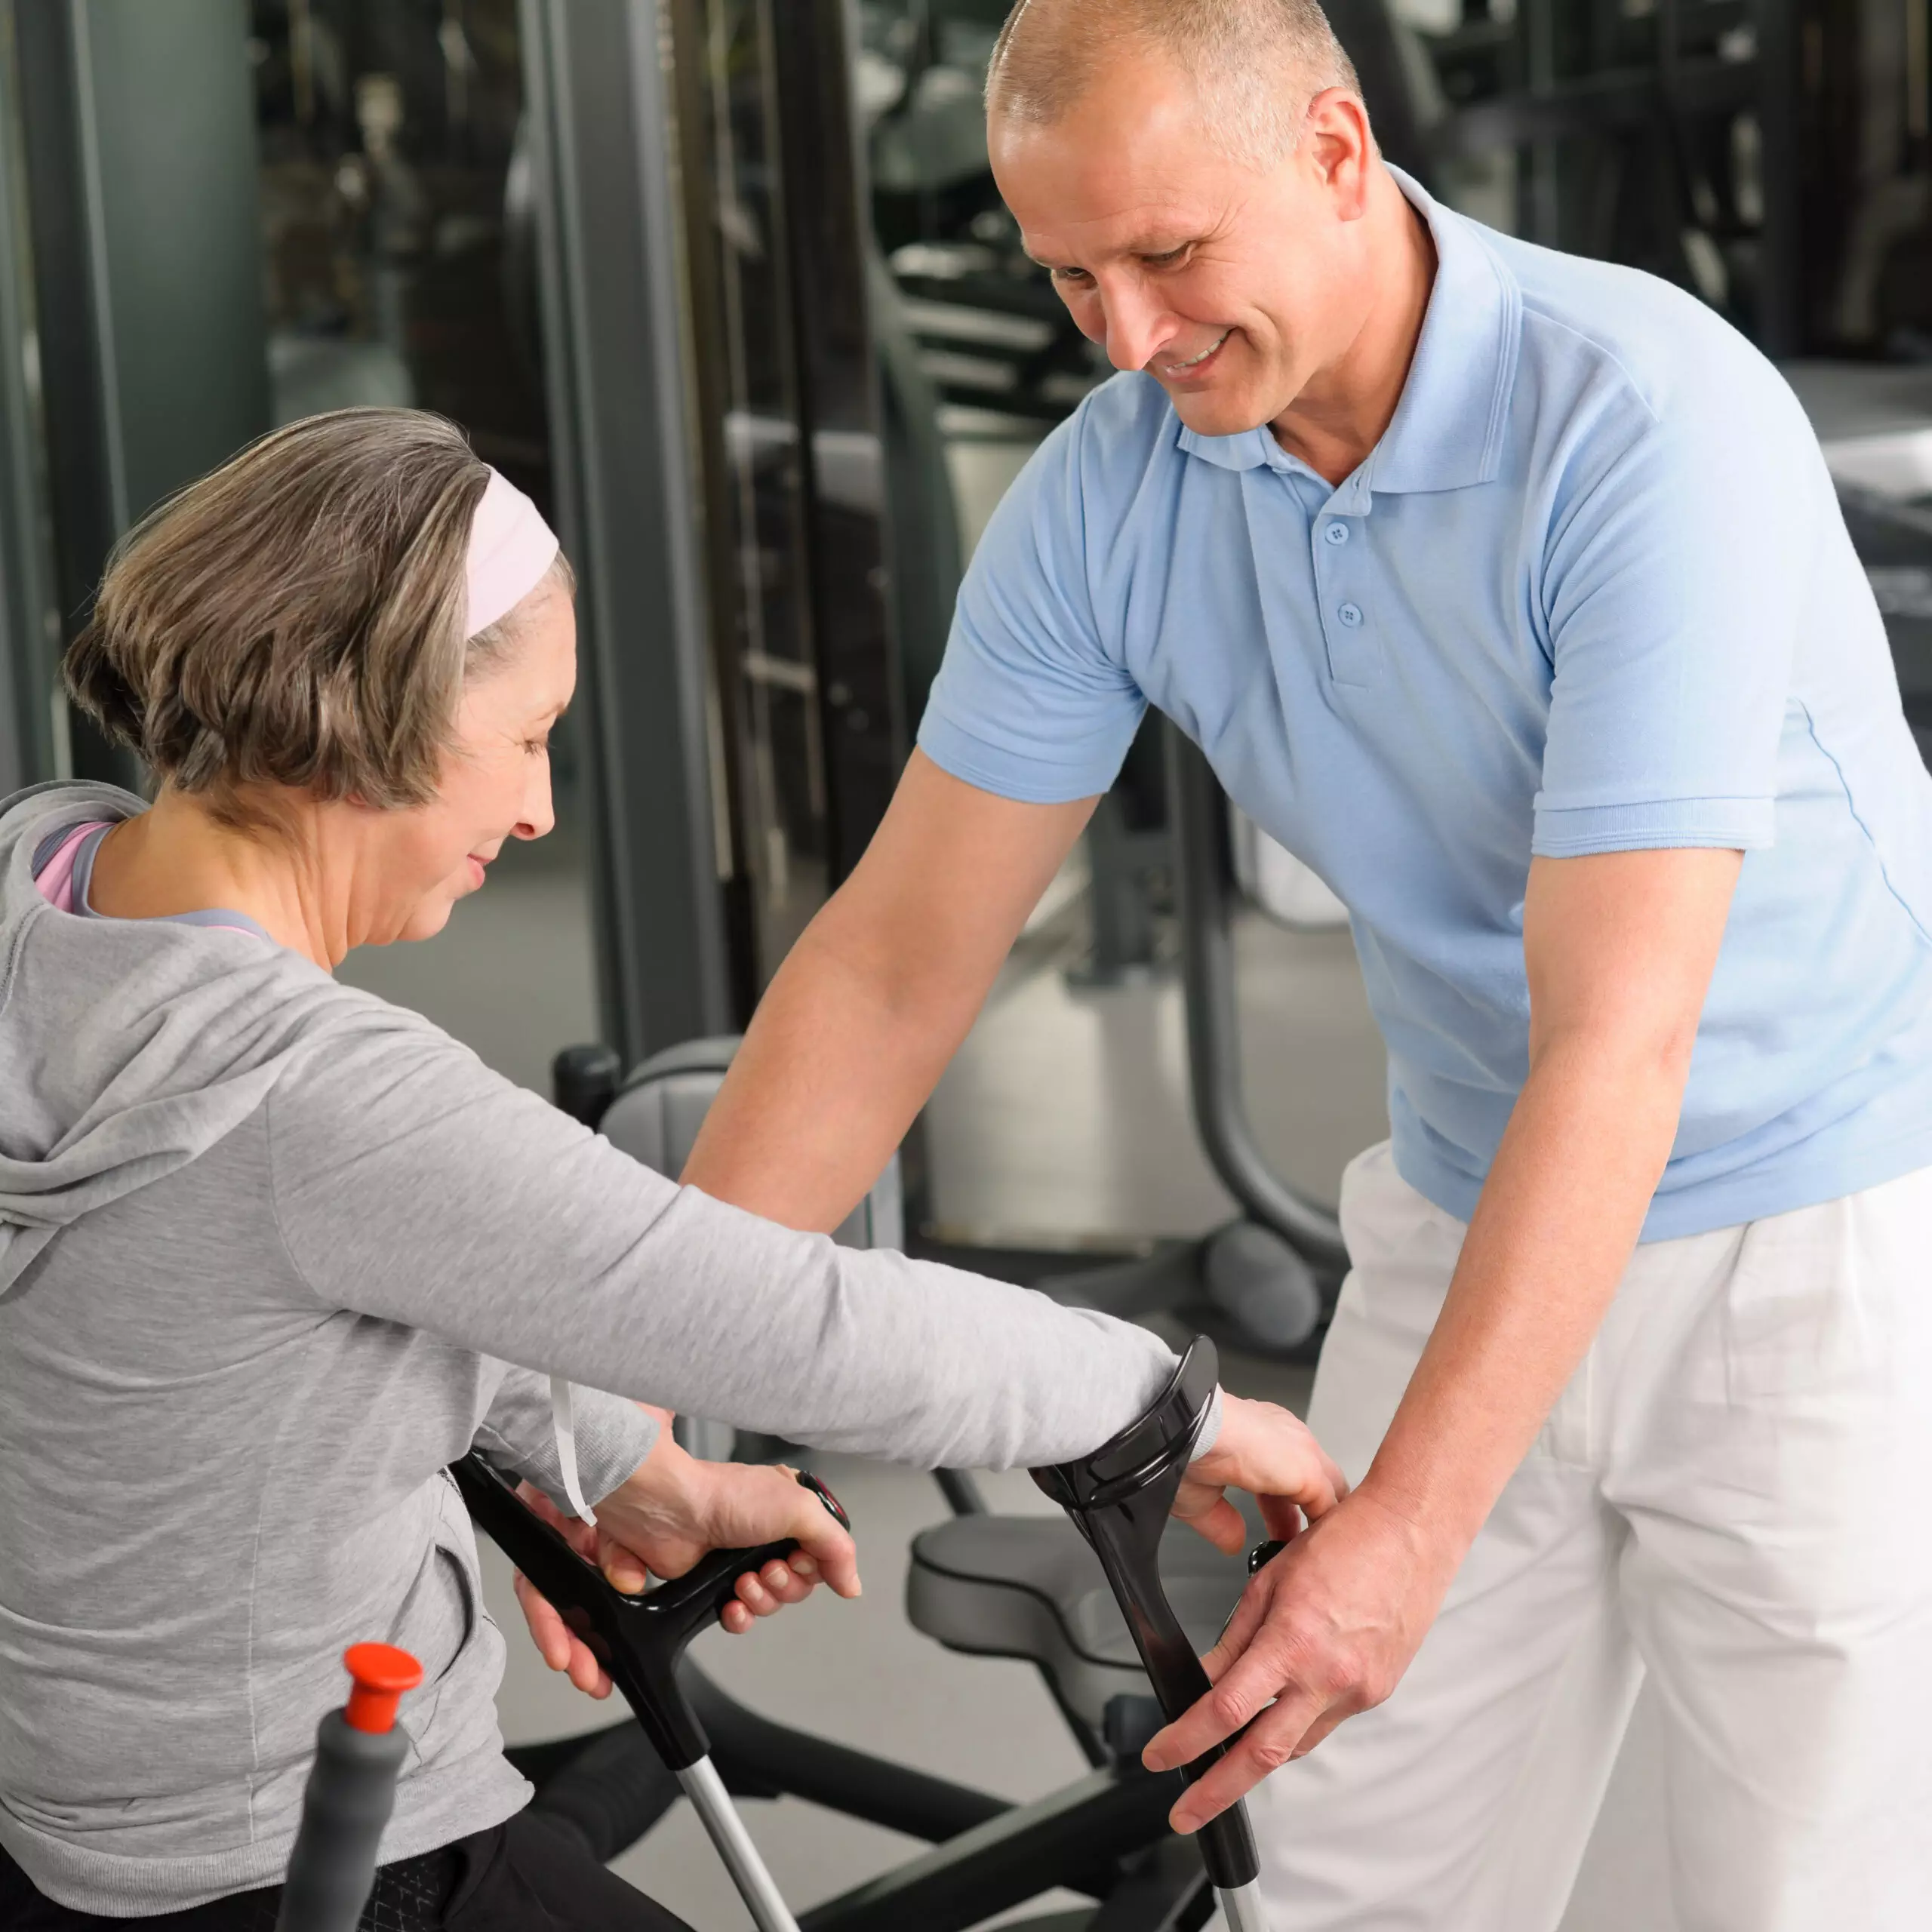 Personal trainer assisting senior woman at gym.